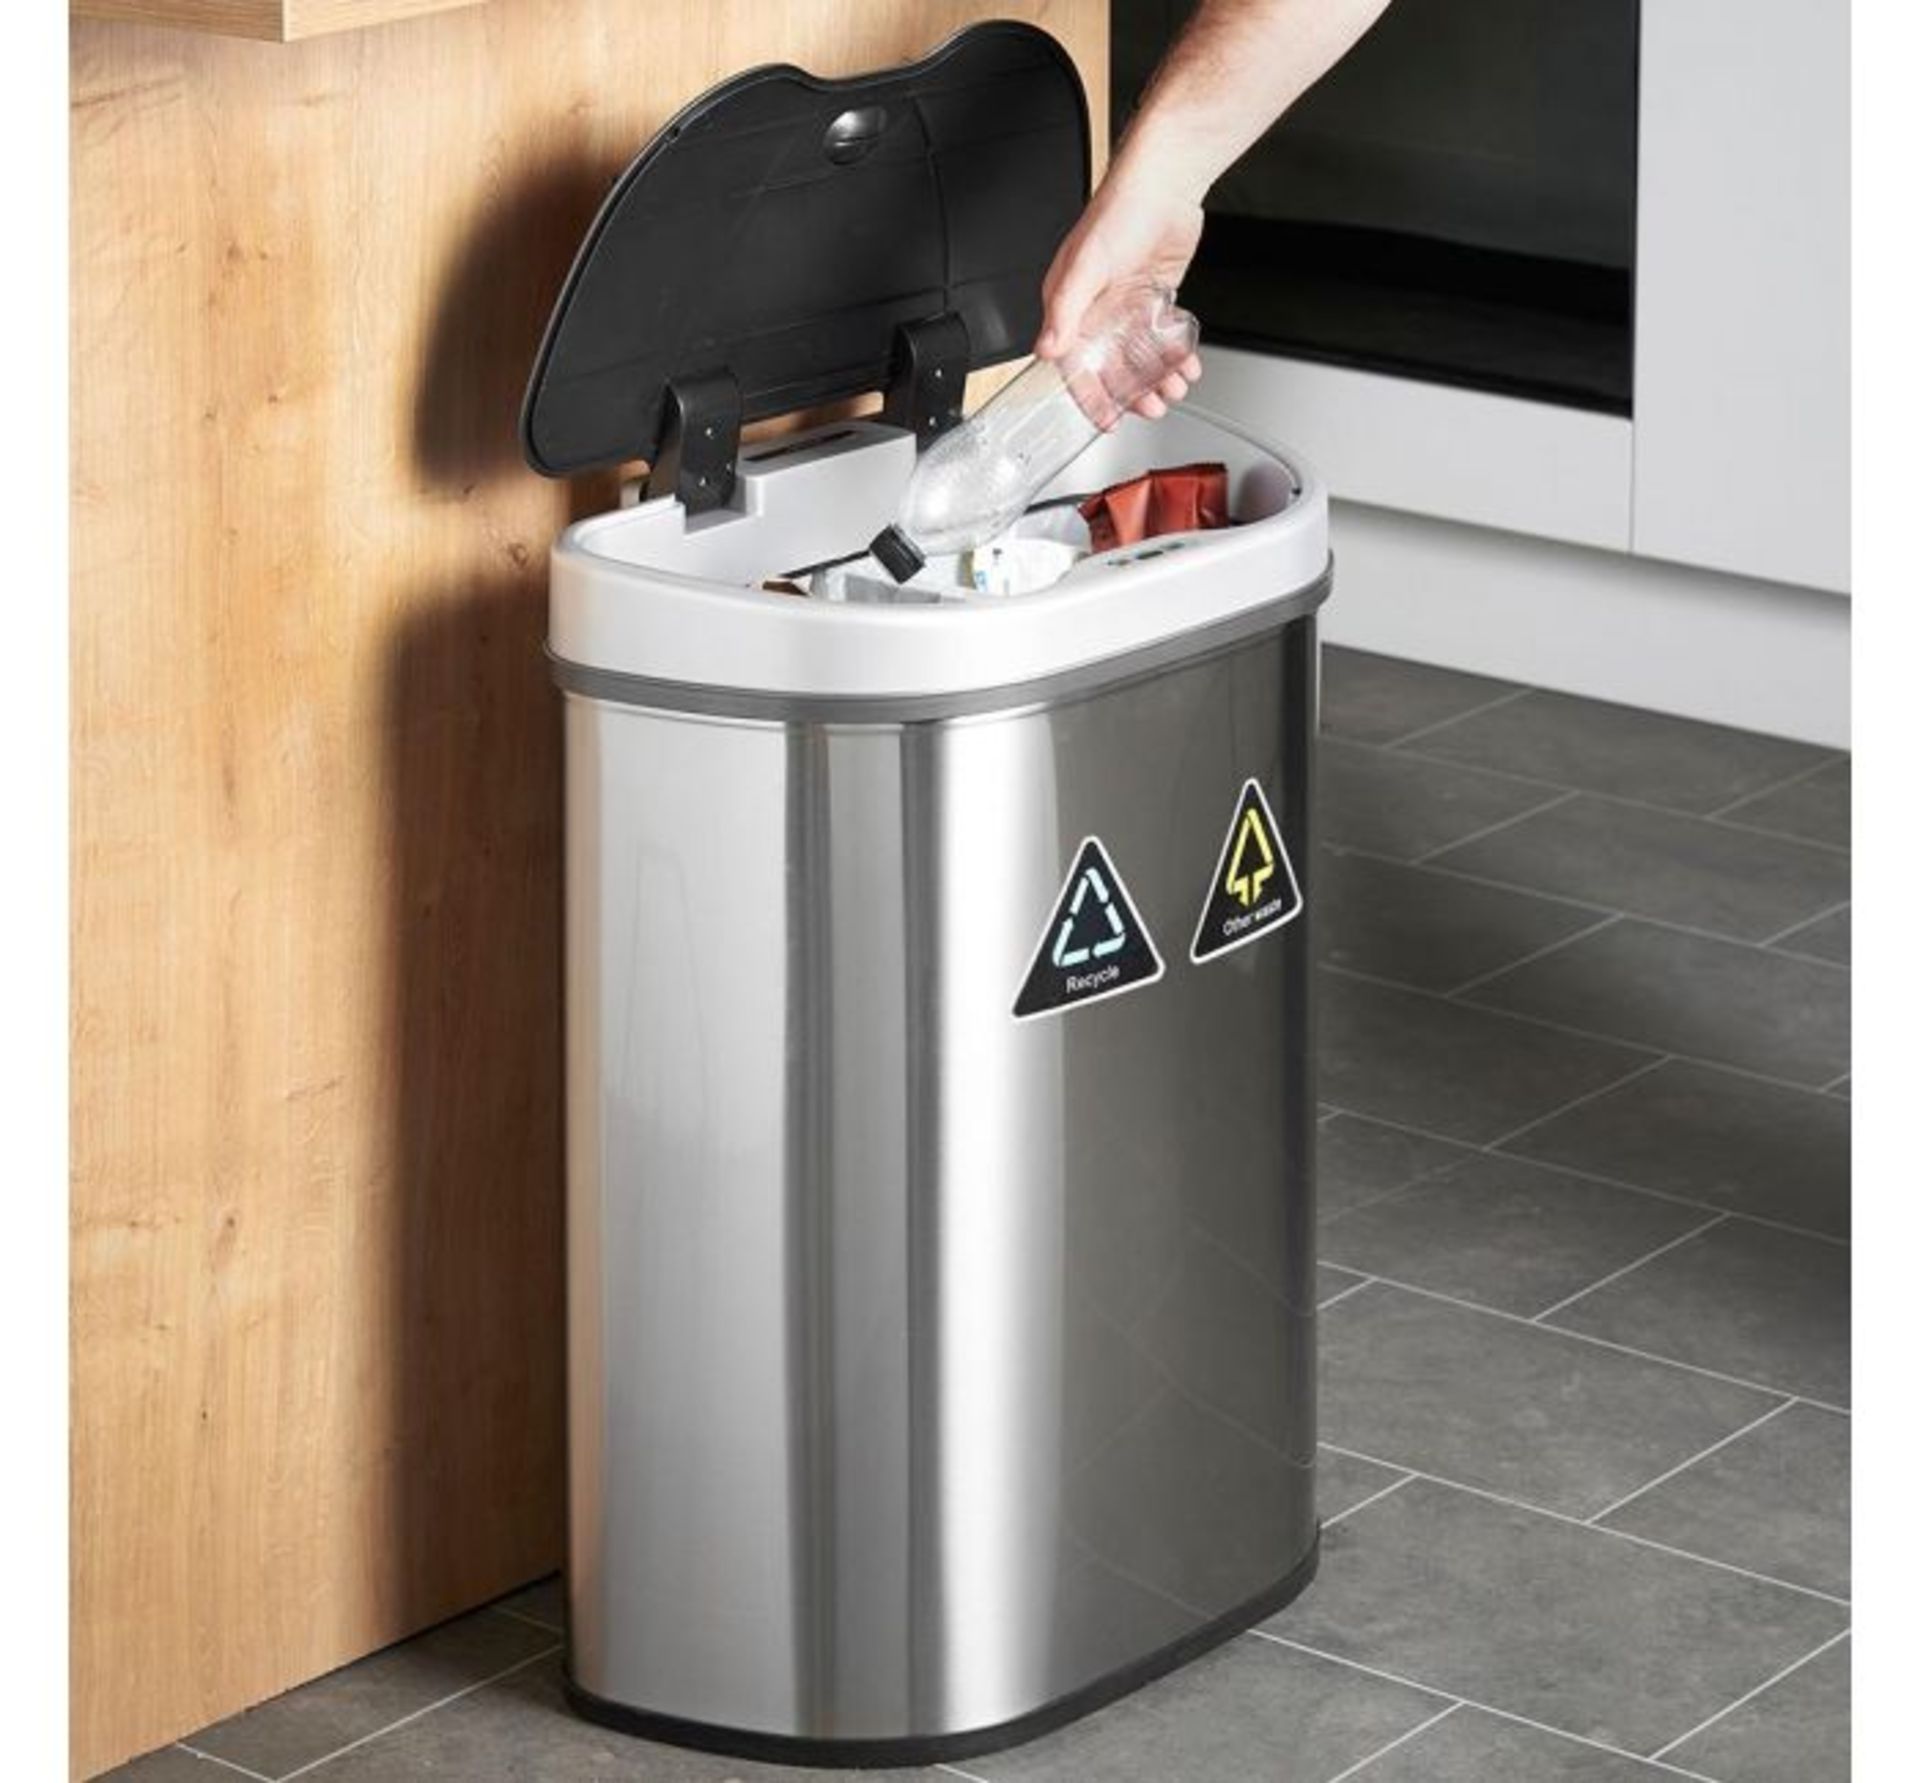 (TD29) 70L Recycling Sensor Bin LED Infrared Sensor opens the lid automatically, so there’s ...